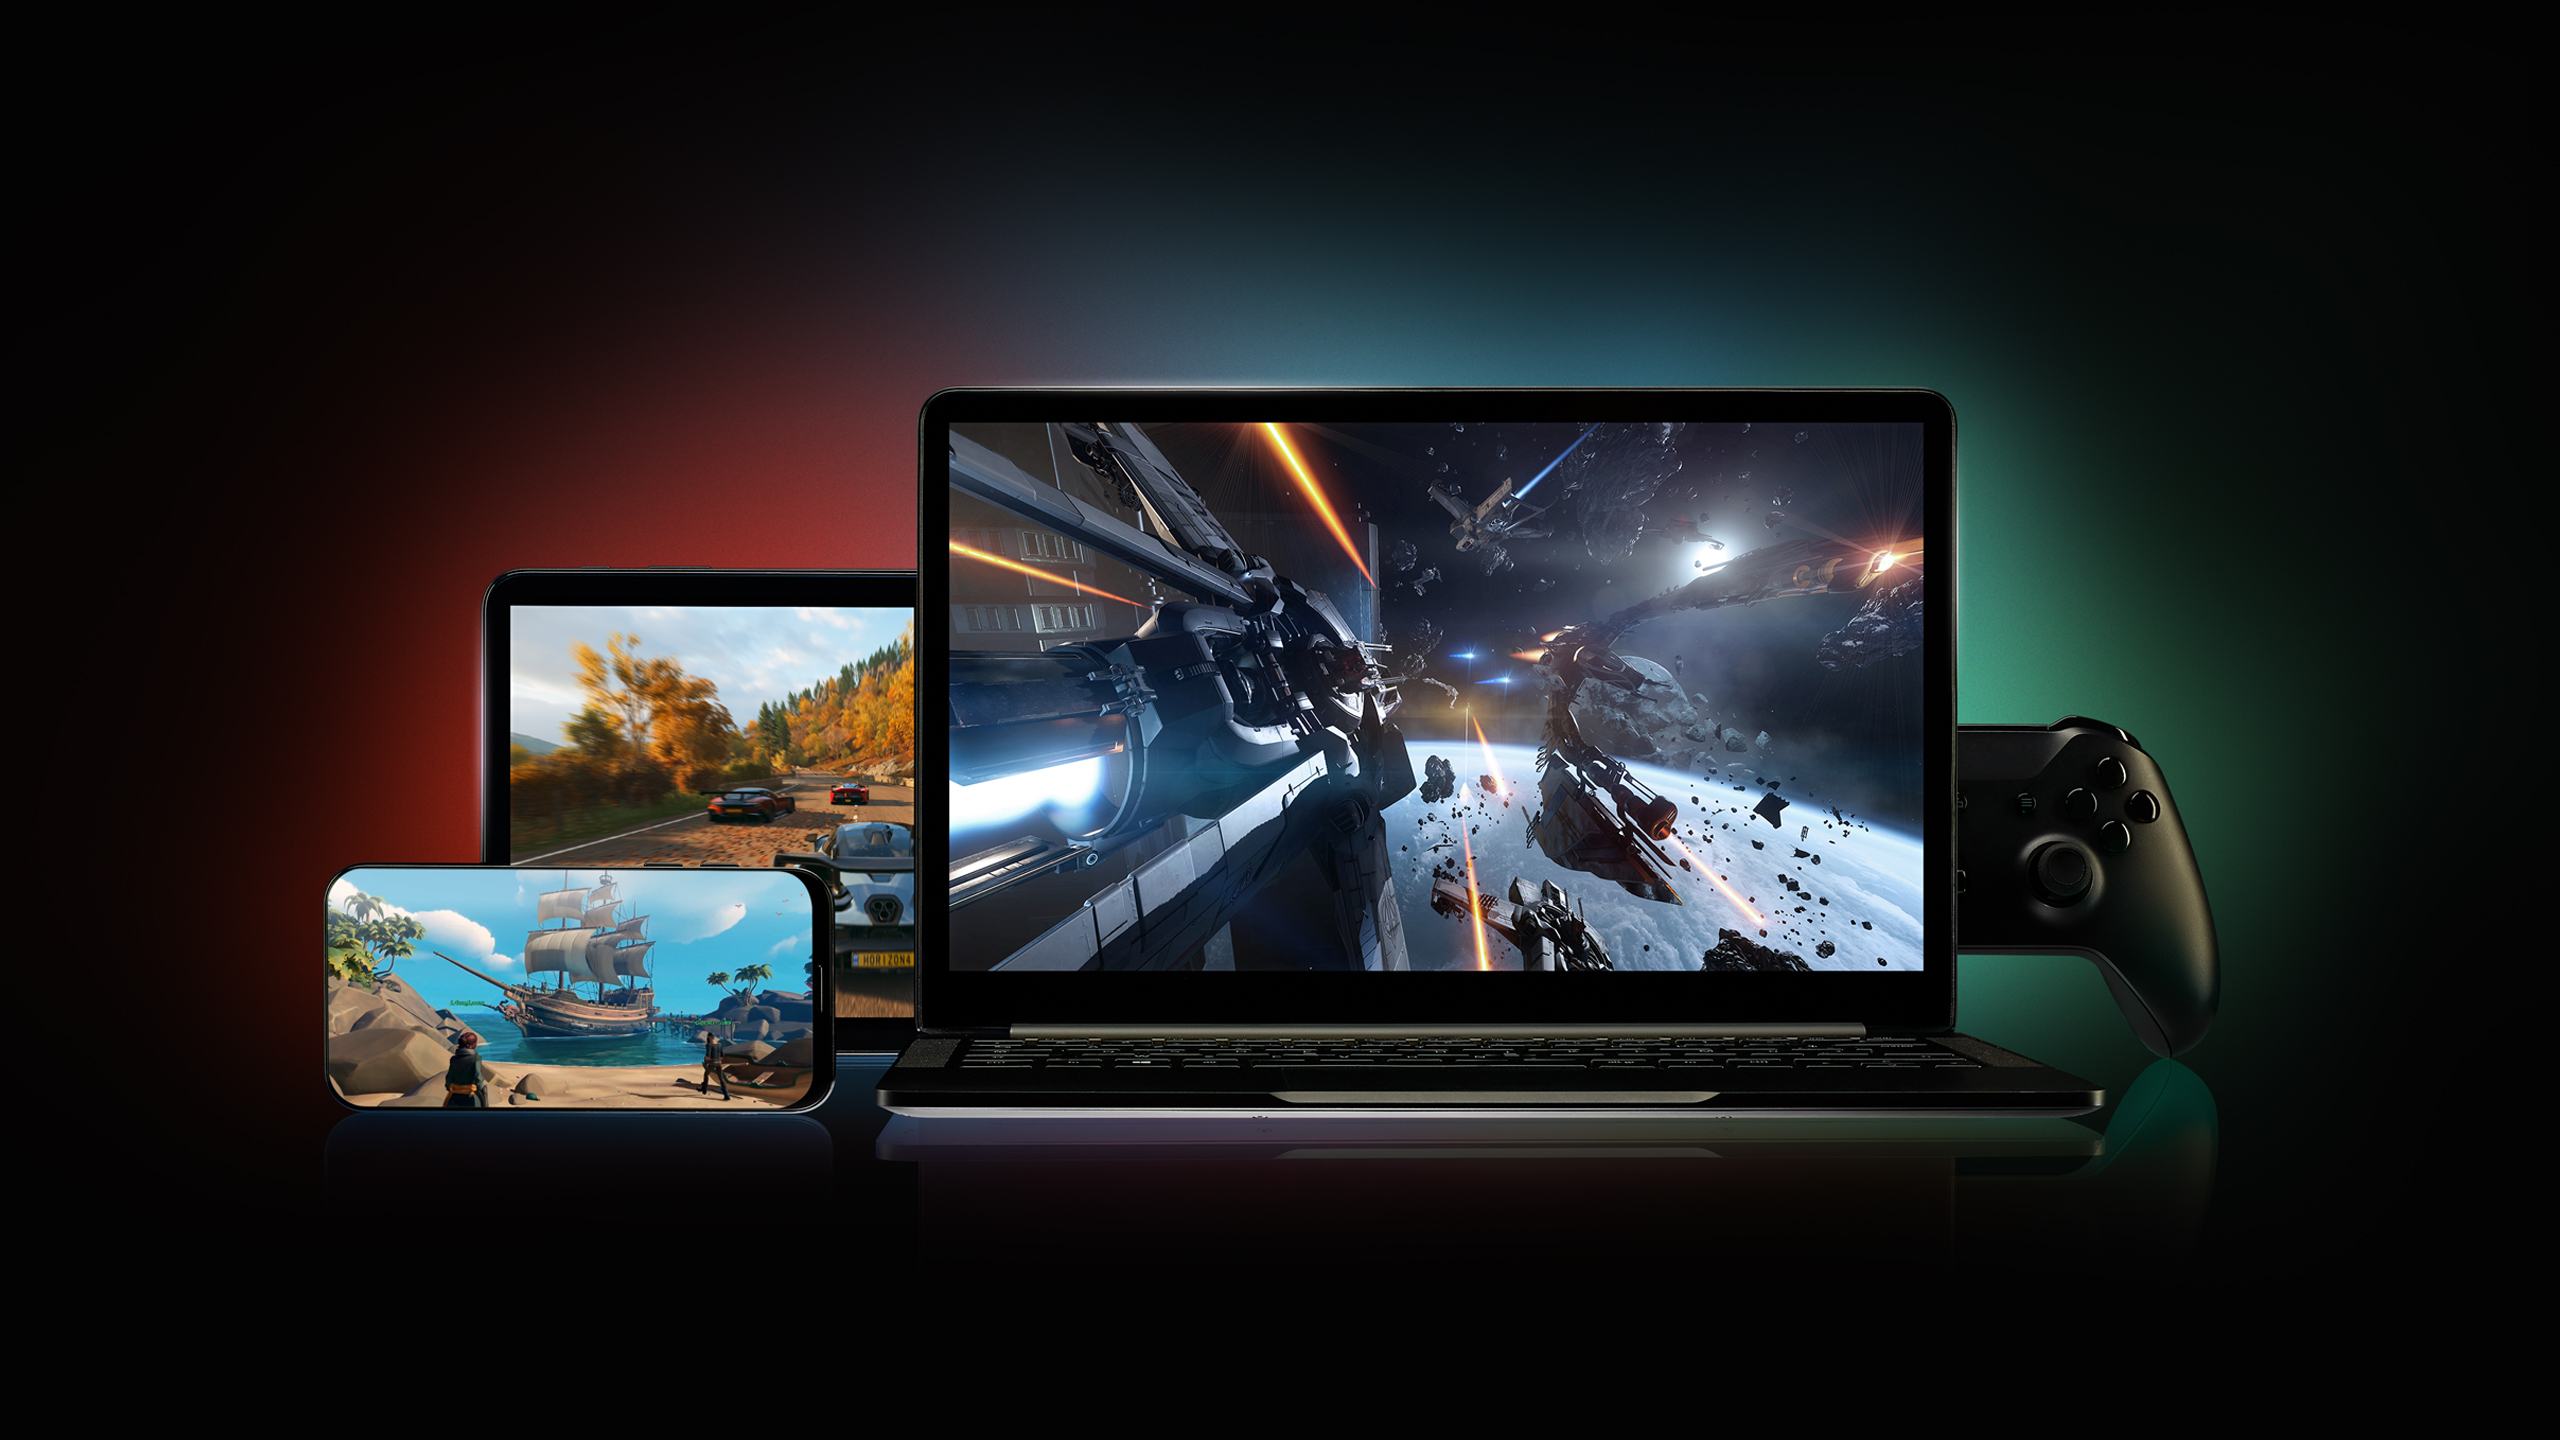 Microsoft sidesteps App Store with Xbox Cloud Gaming - Protocol